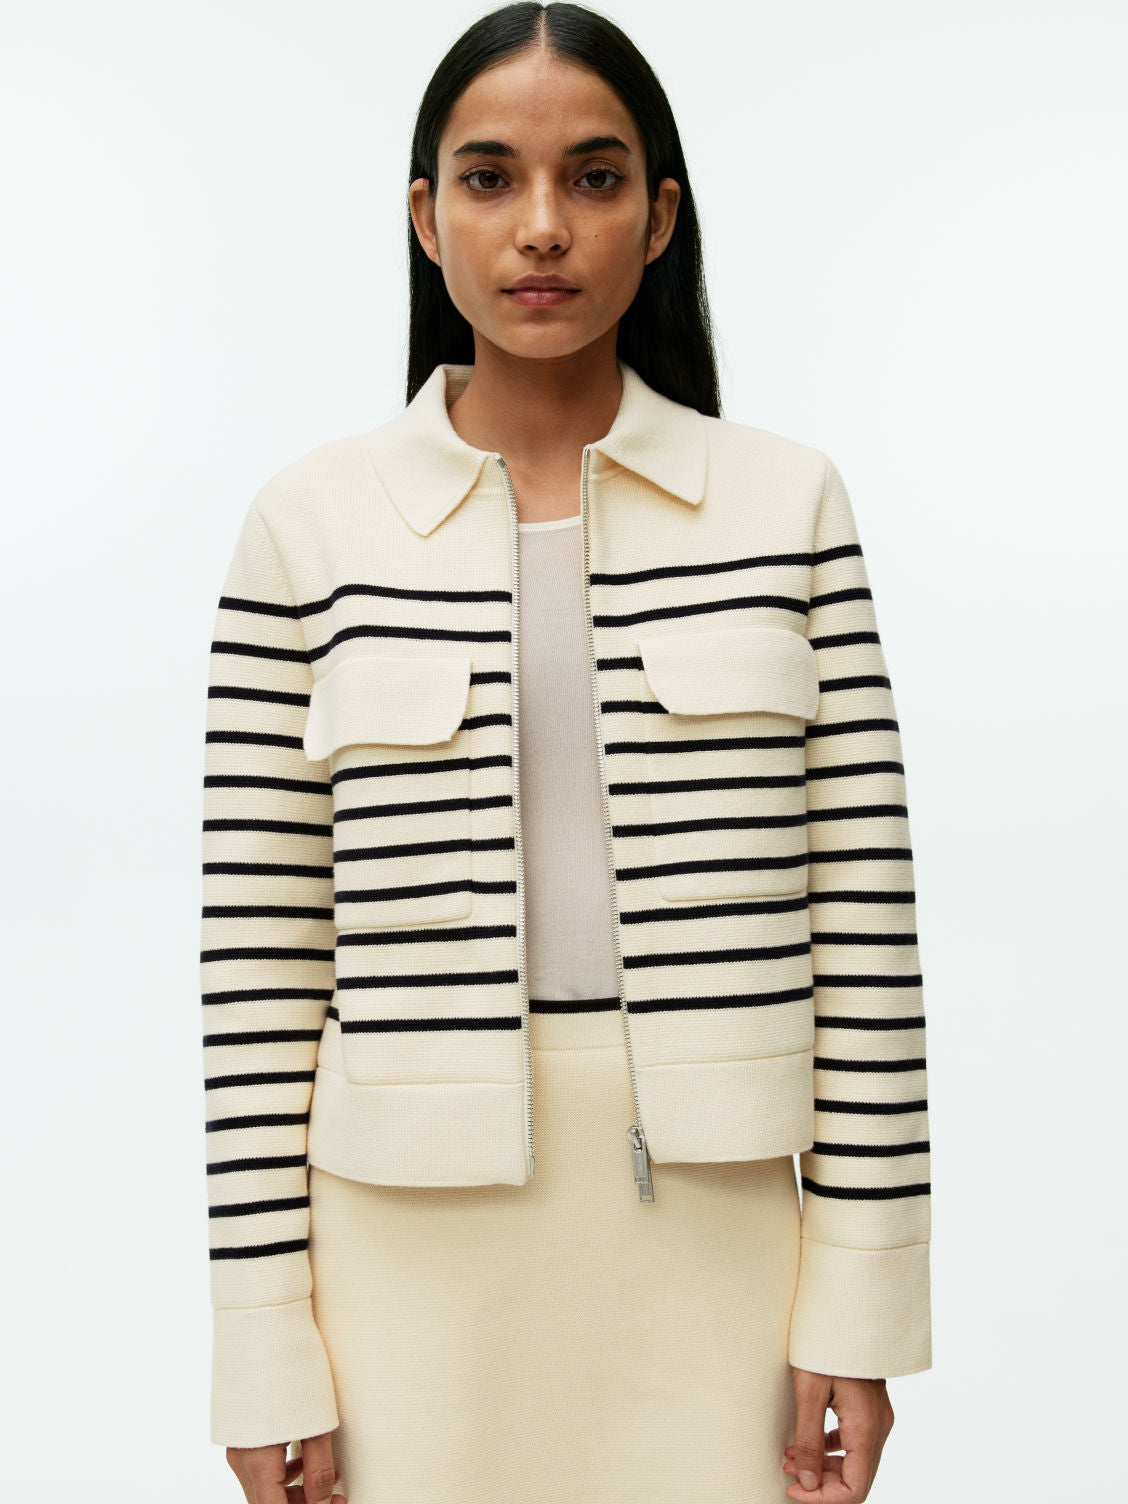 Knitted cotton striped jacket